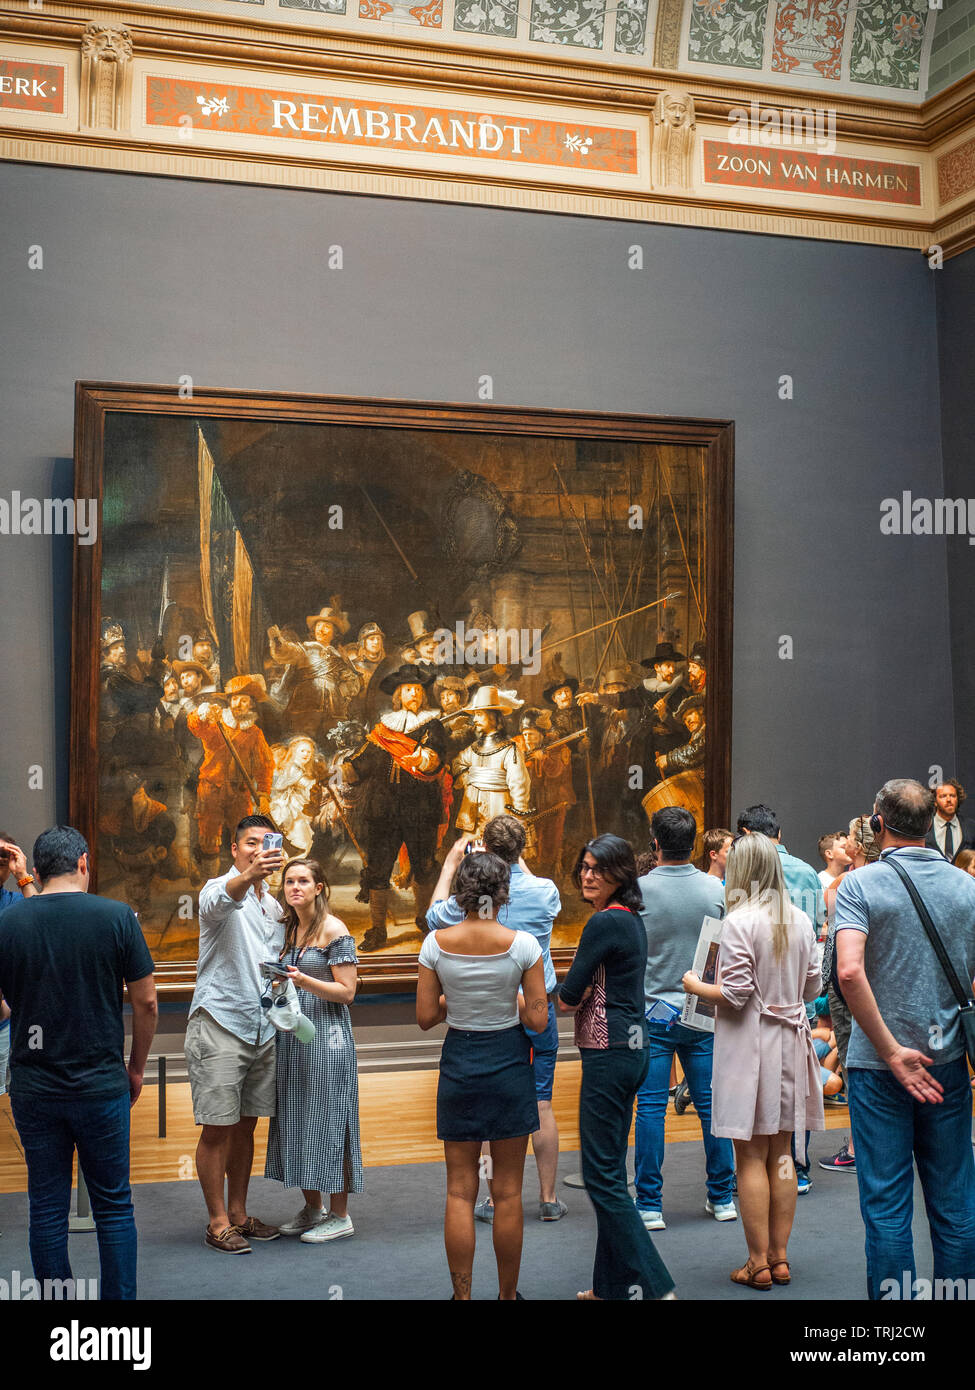 Tourist observing The Night Watch, a painting by Rembrandt Harmenszoon van Rijn, at the Rijksmuseum in Amsterdam, The Netherlands. Rembrandt is consid Stock Photo